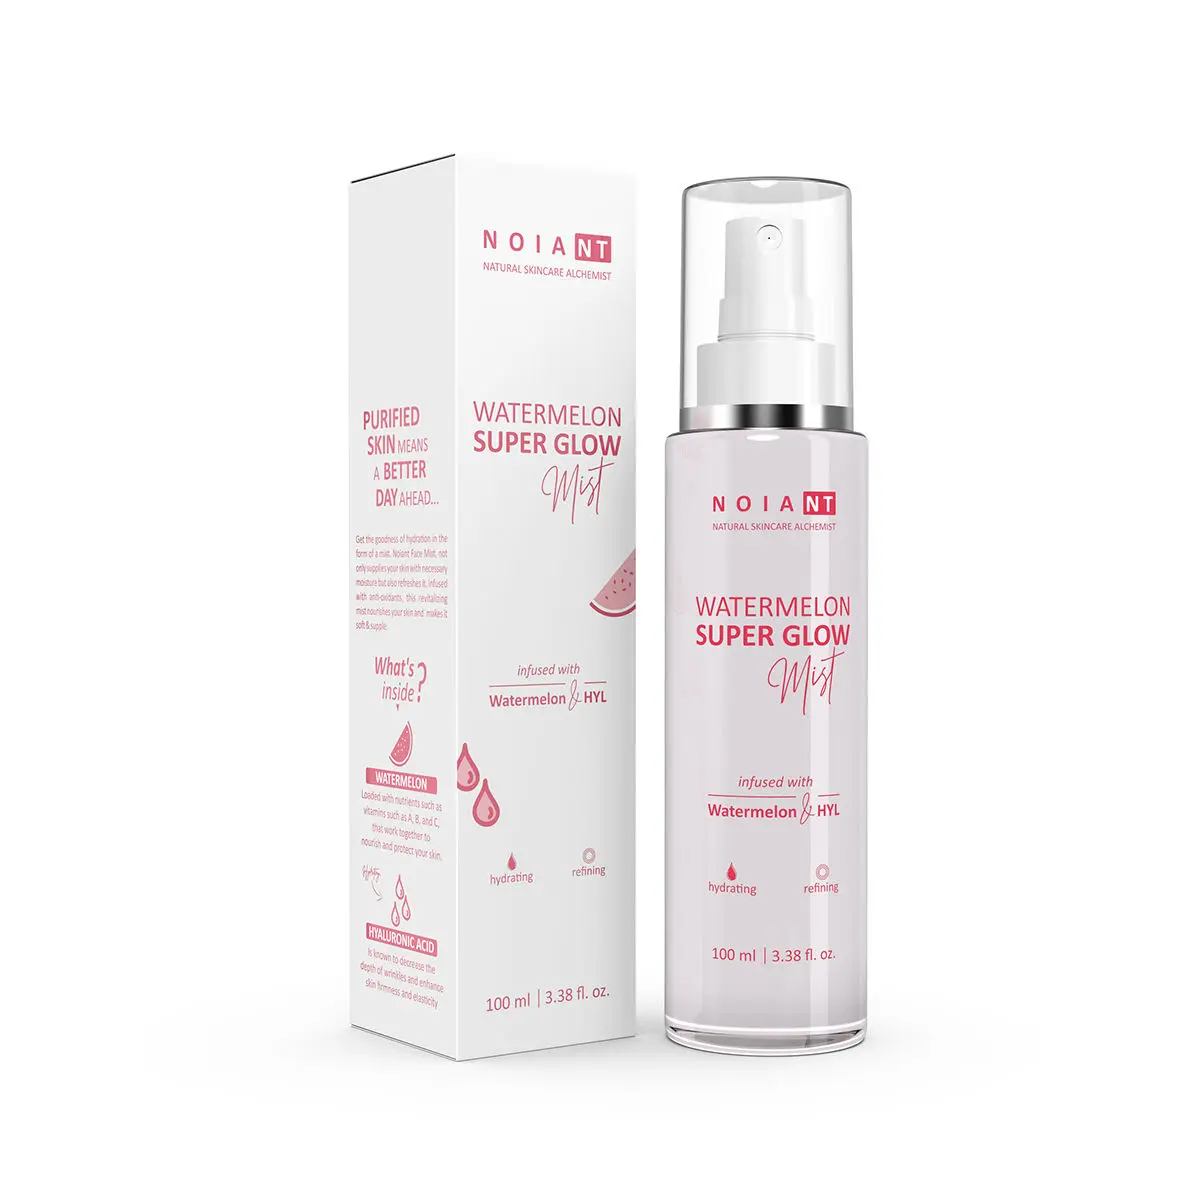 Noiant Watermelon Superglow Mist Infused With Watermelon & Hyl | For Hydrating and Refining Skin | All Skin Types | 100ml